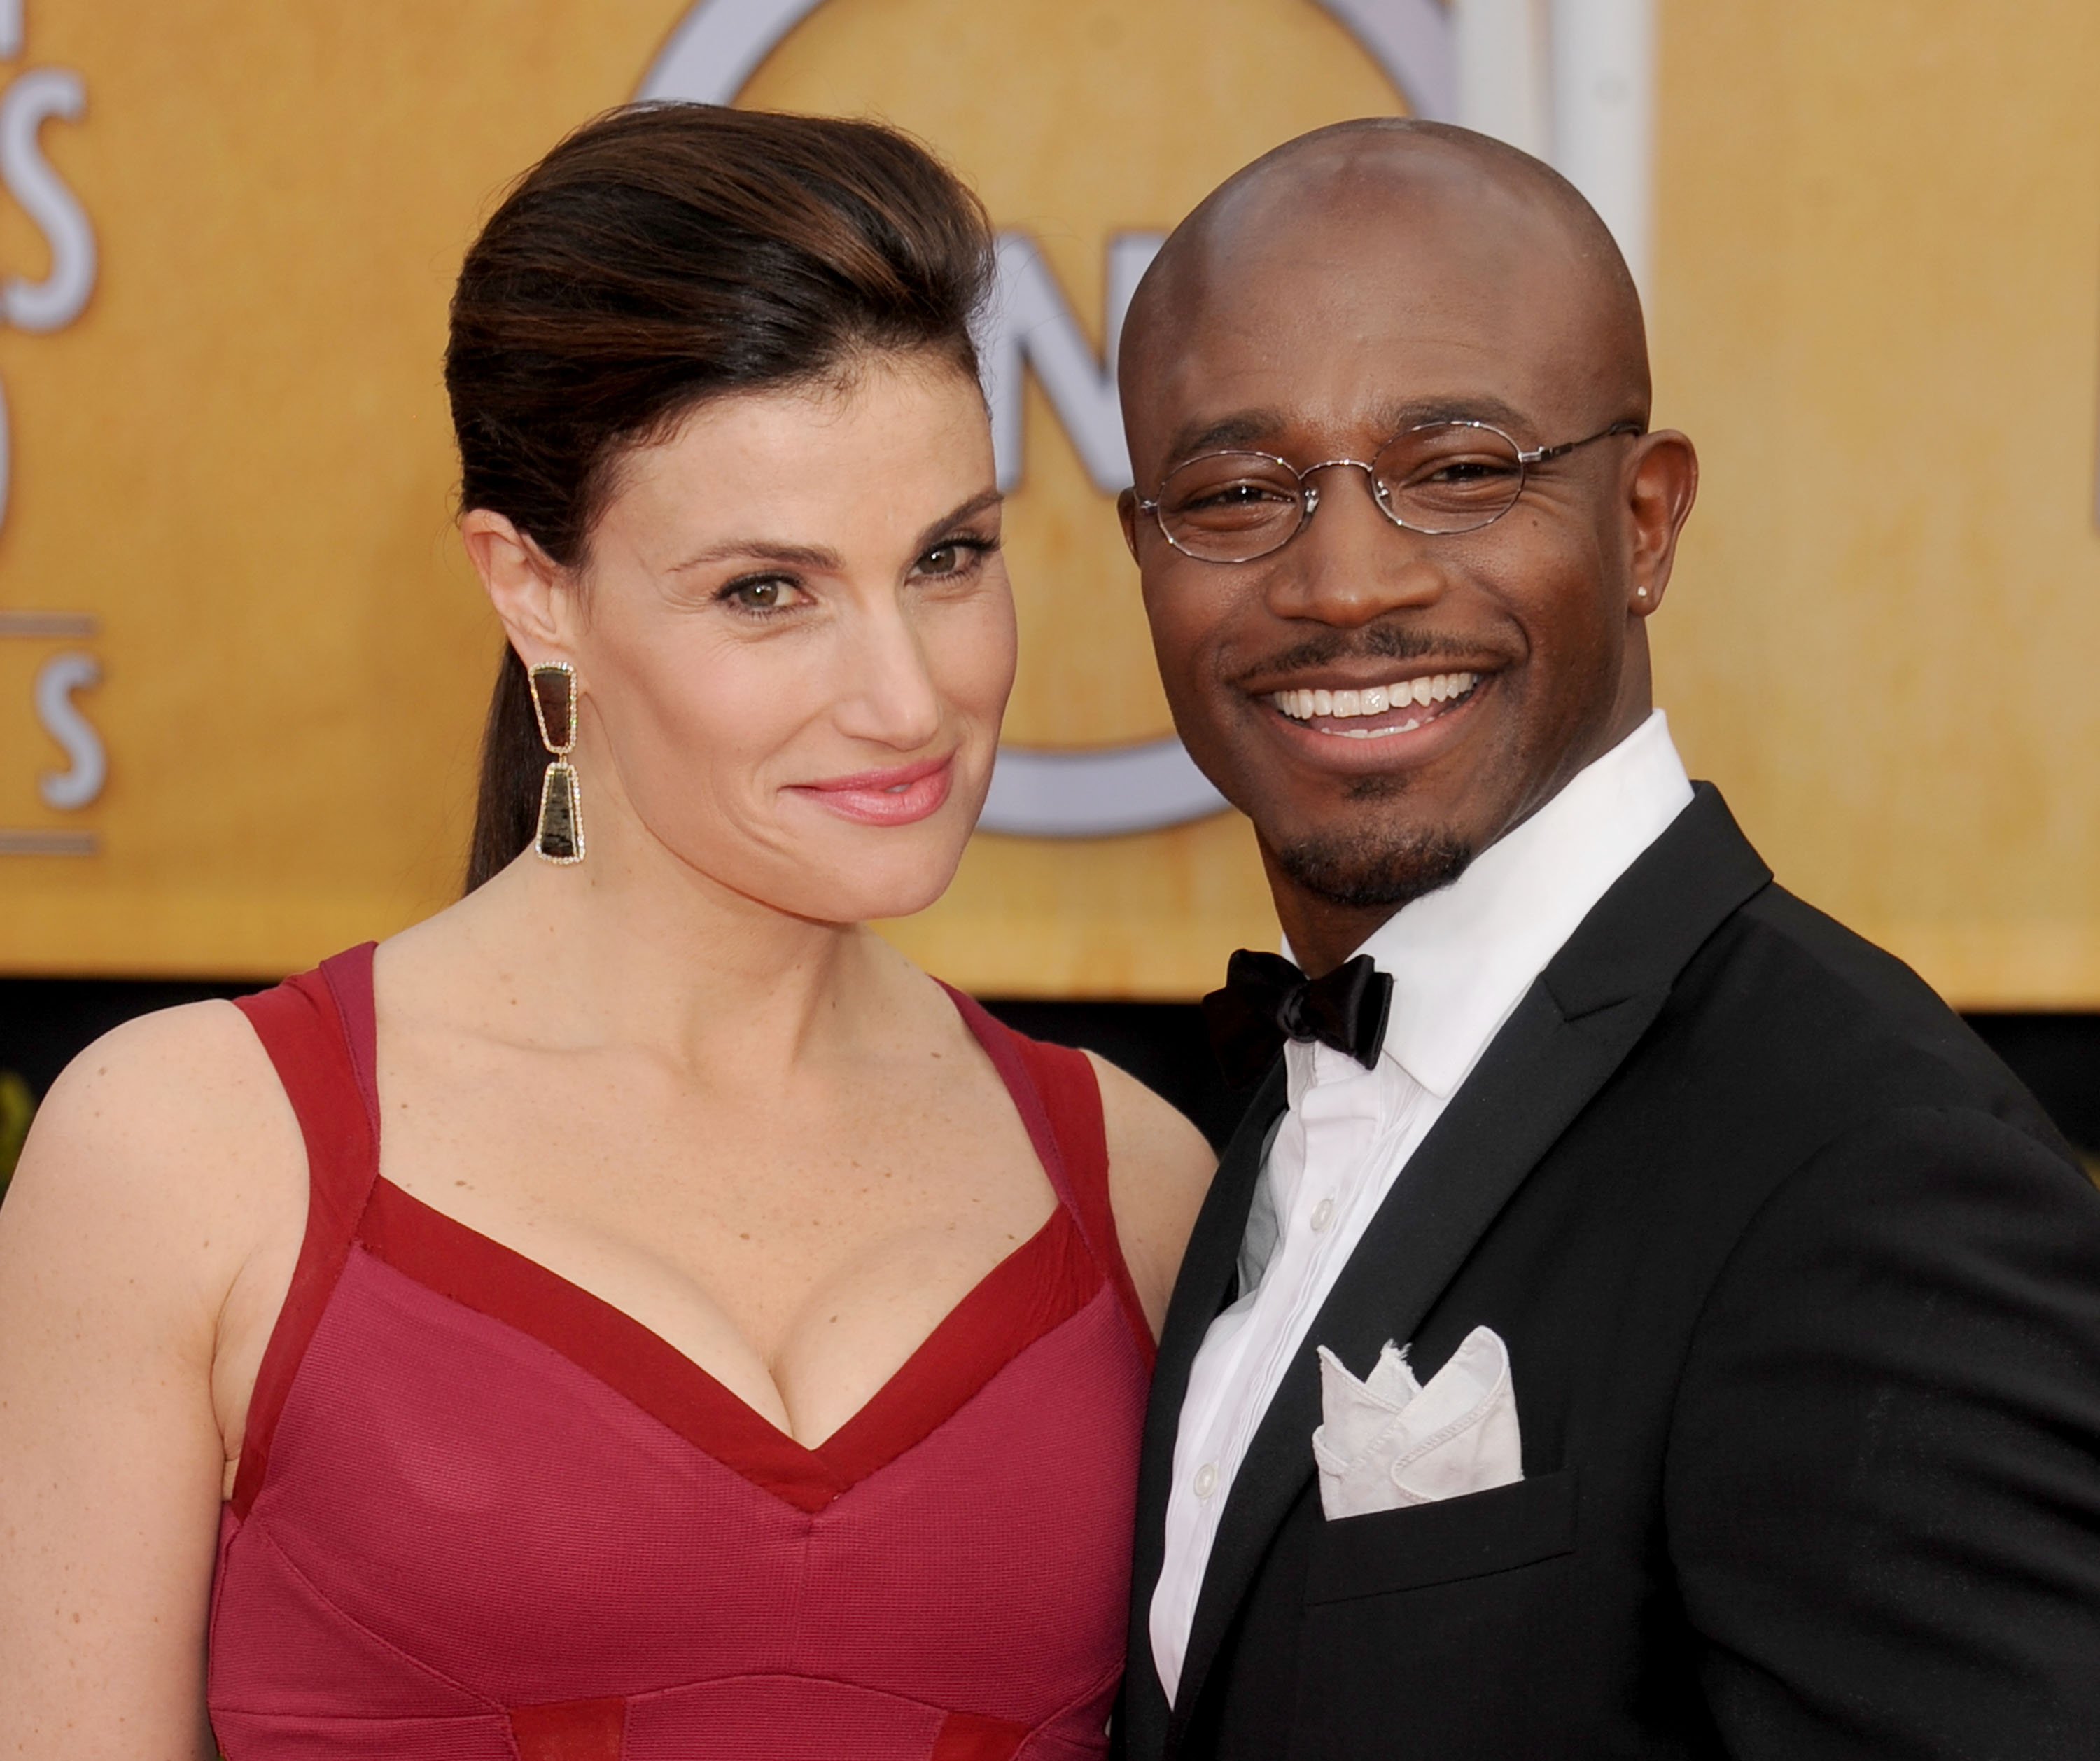 Actors Idina Menzel and Taye Diggs pose as they arrive at the 19th Annual Screen Actors Guild Awards on January 27, 2013 in Los Angeles | Source: Getty Images